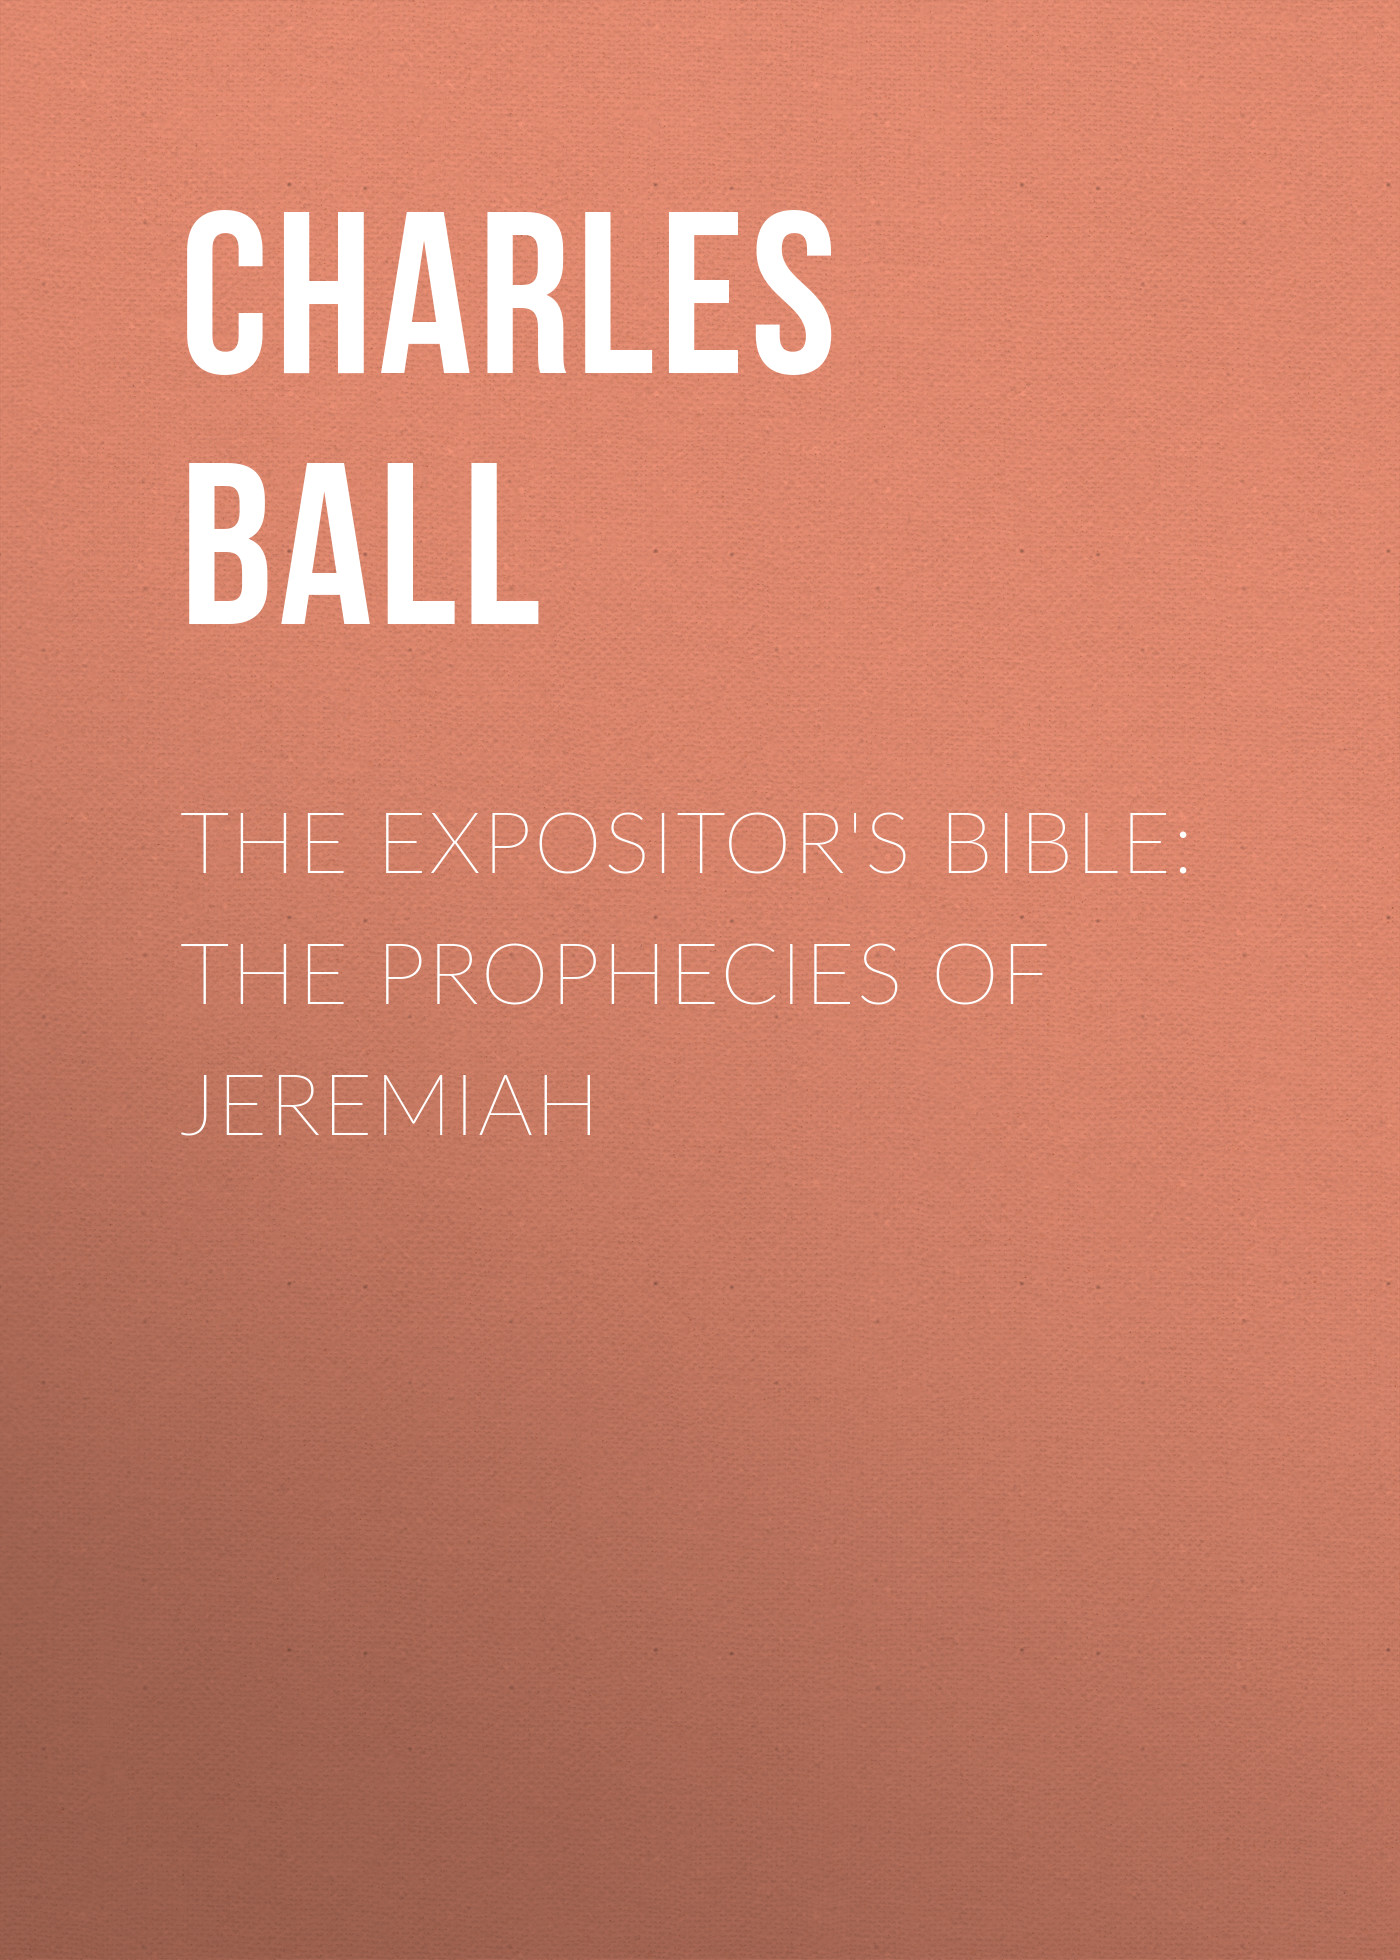 The Expositor's Bible: The Prophecies of Jeremiah